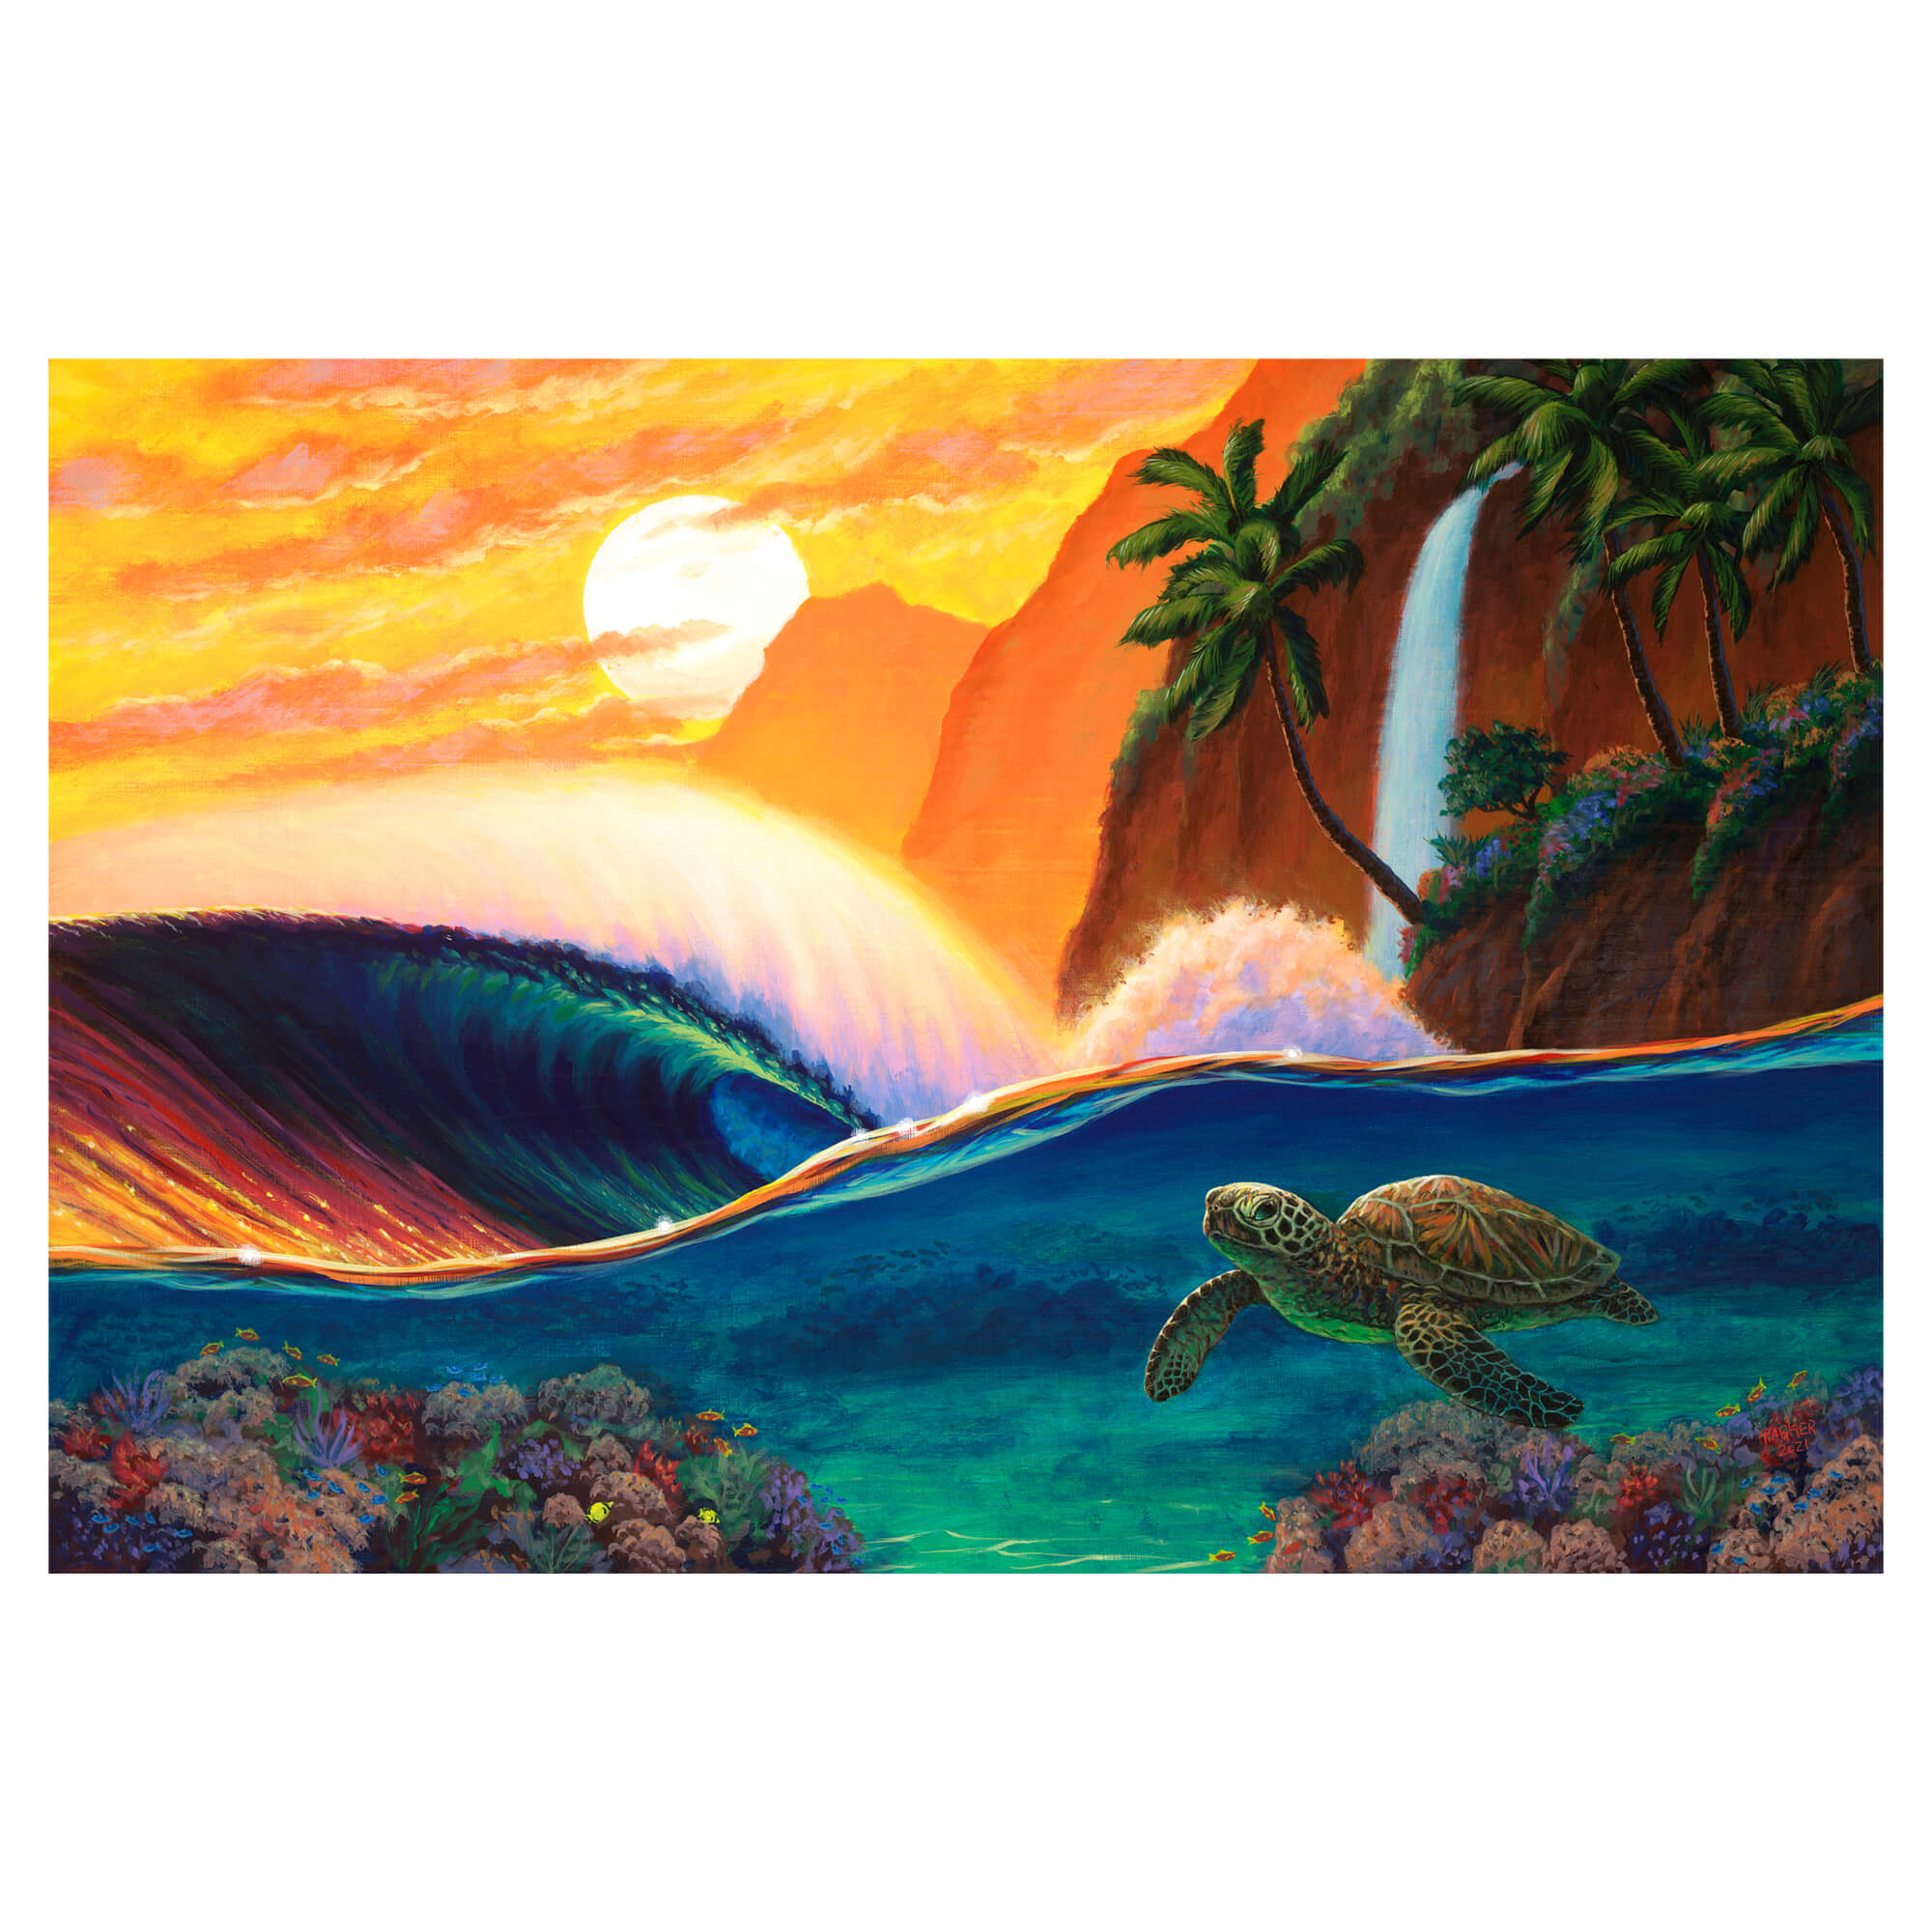 A matted art print featuring a sea turtle swimming and a vibrant sunset, crashing waves, and a mountain waterfall background by Hawaii artist Patrick Parker